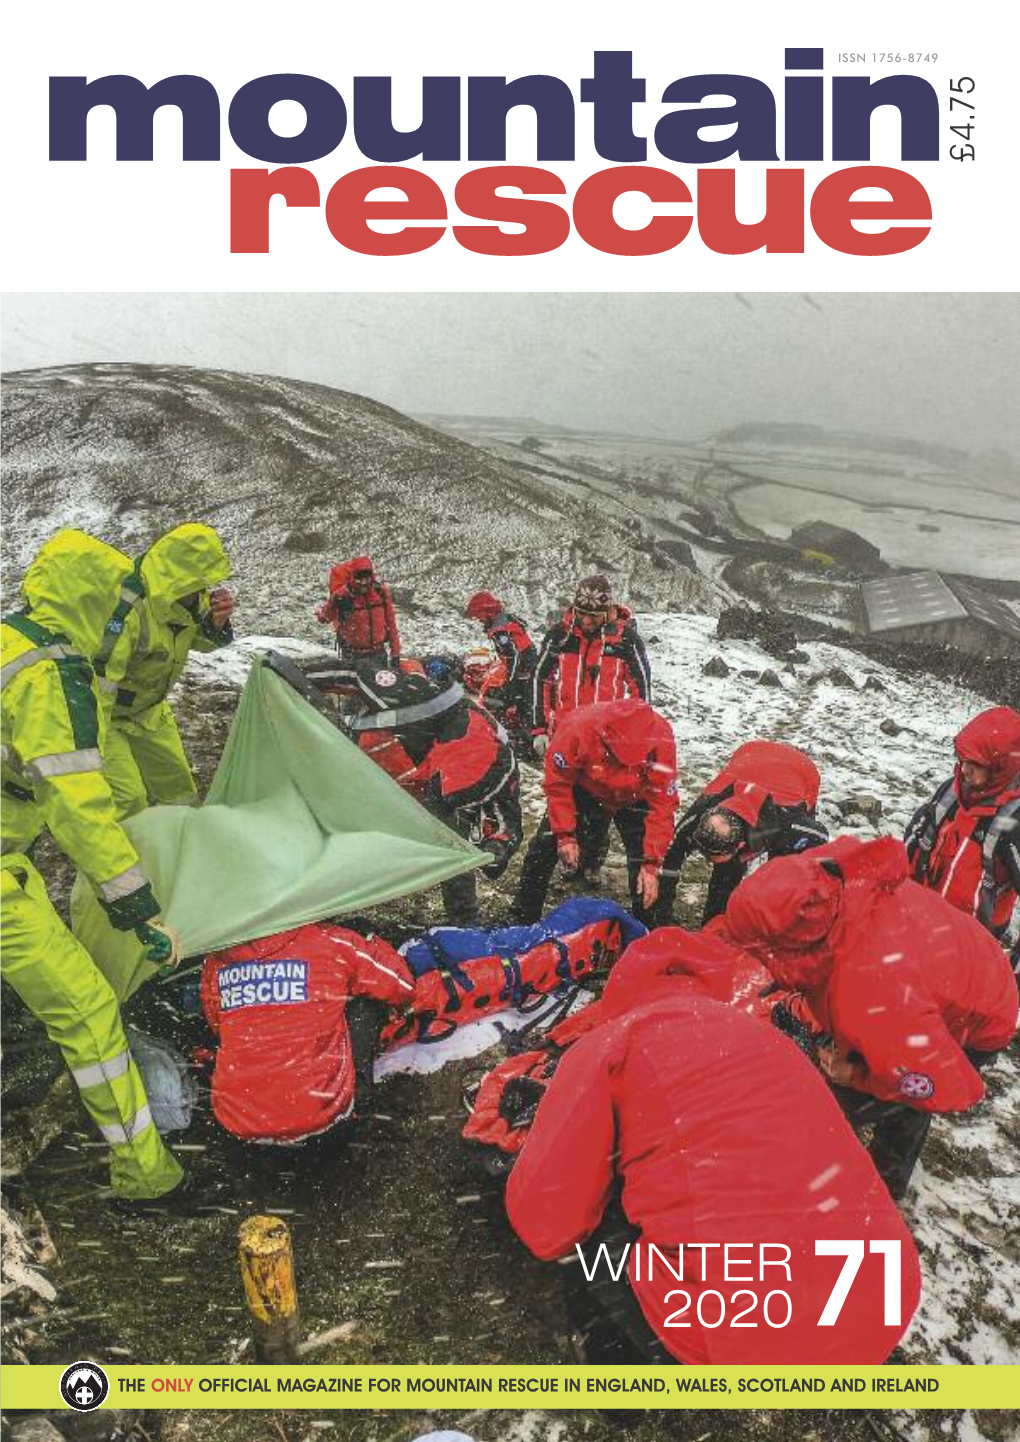 WINTER 2020 Mountain Rescue Is the Only in This Issue Official Magazine for Mountain Rescue in England, Wales, Scotland and Ireland